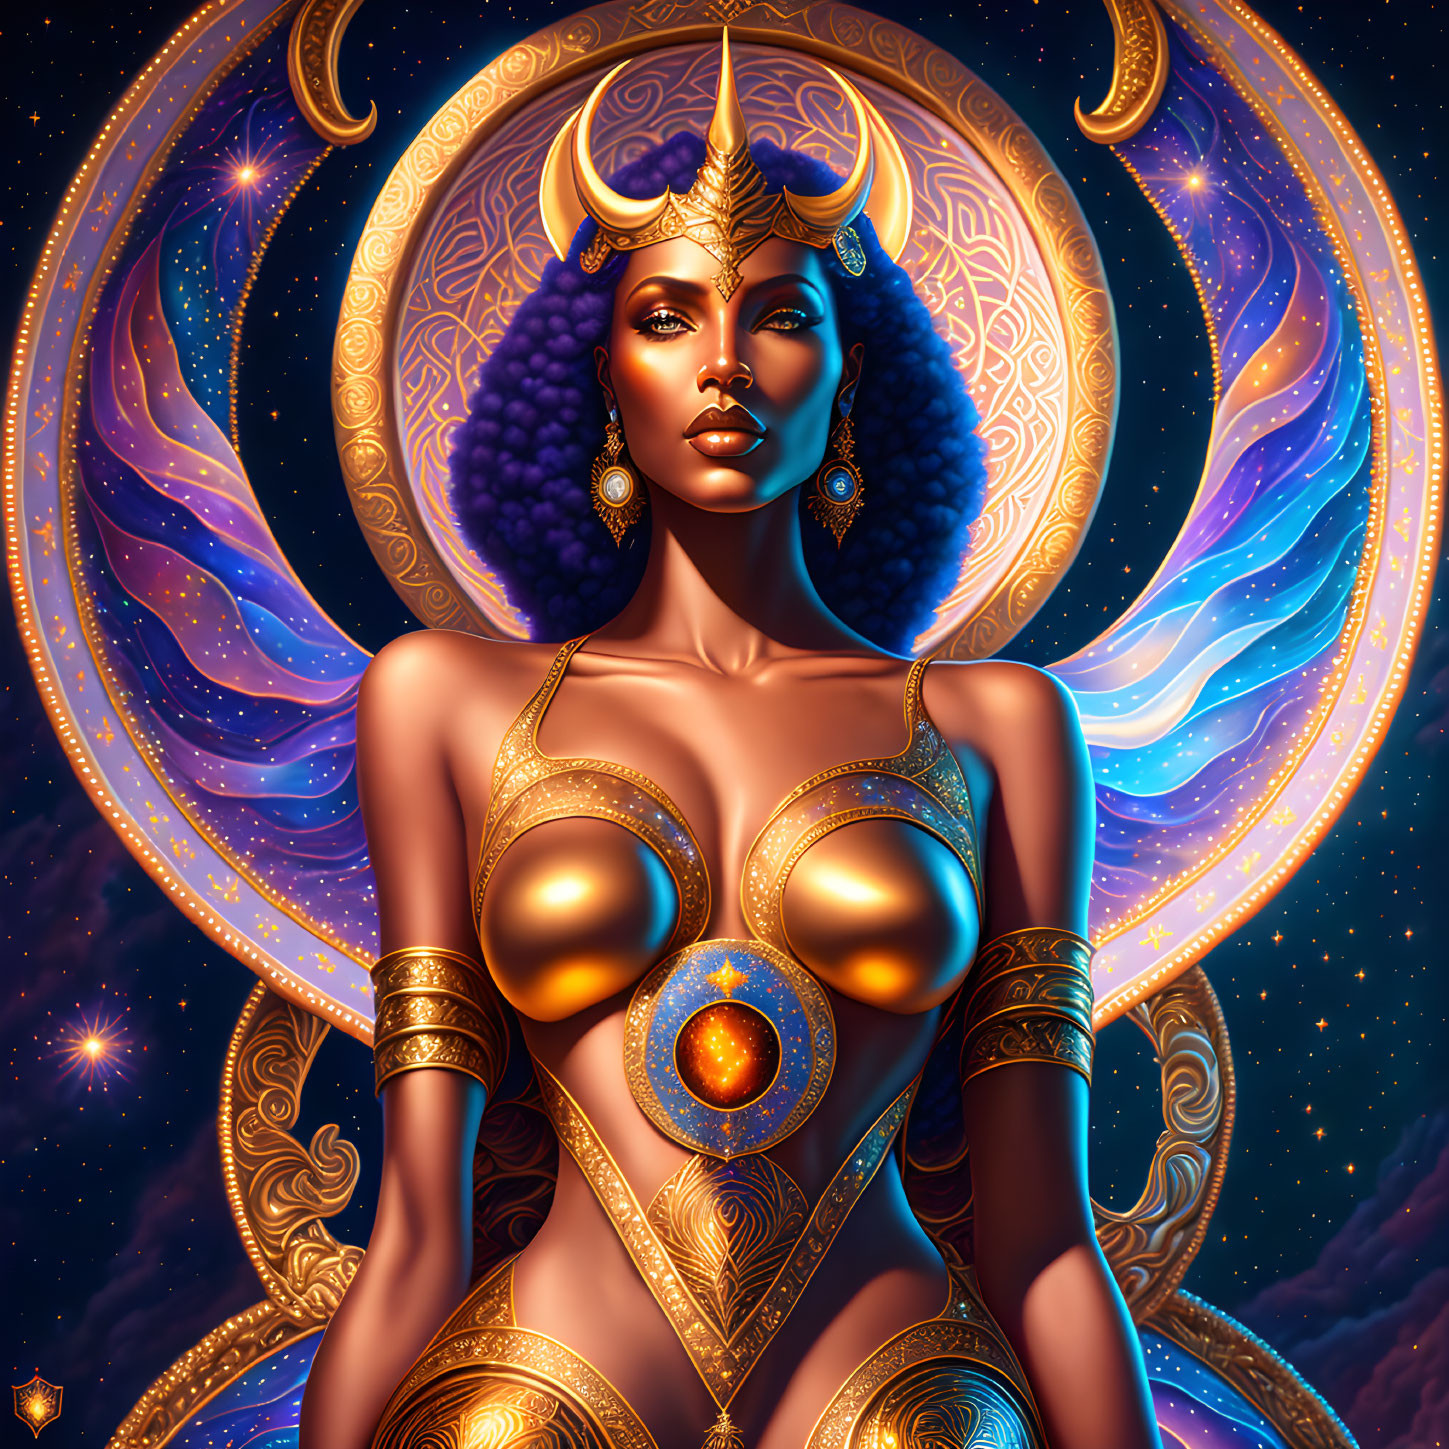 Digital portrait of woman with golden accessories, blue lips, and purple hair in cosmic setting.